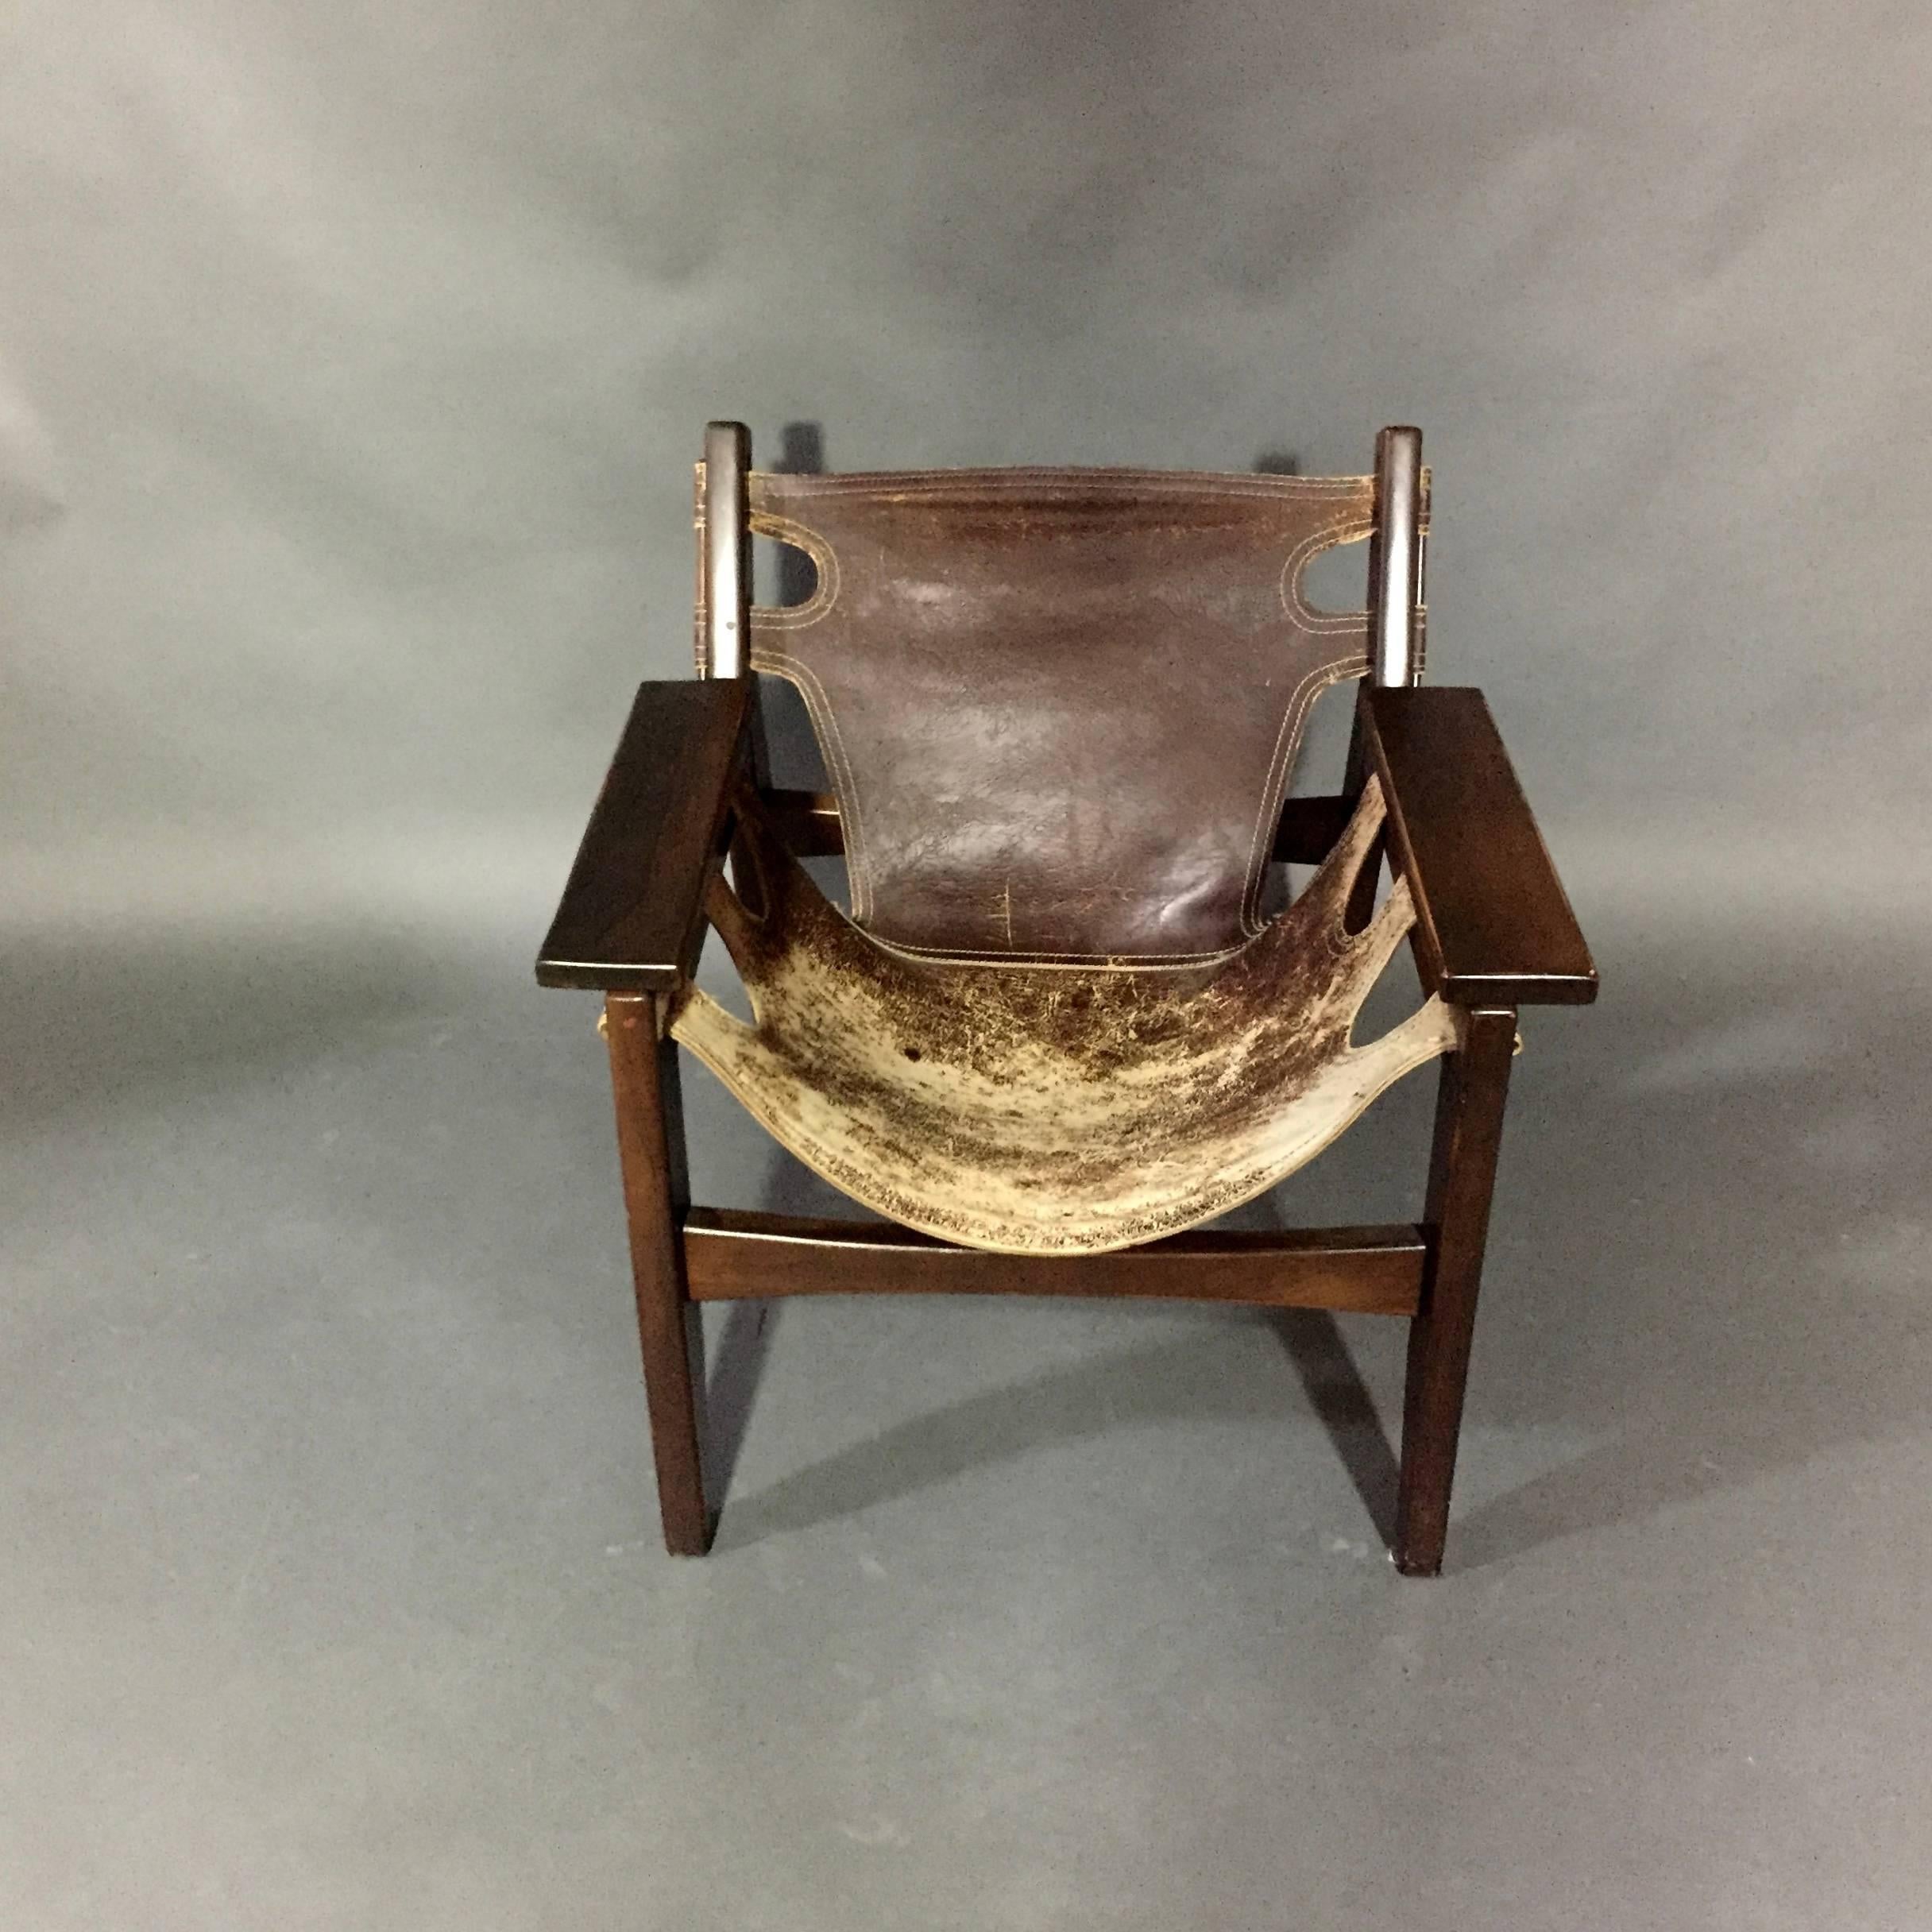 Brazilian Sergio Rodrigues Kilin Lounge Chair, Rosewood and Leather, Brazil